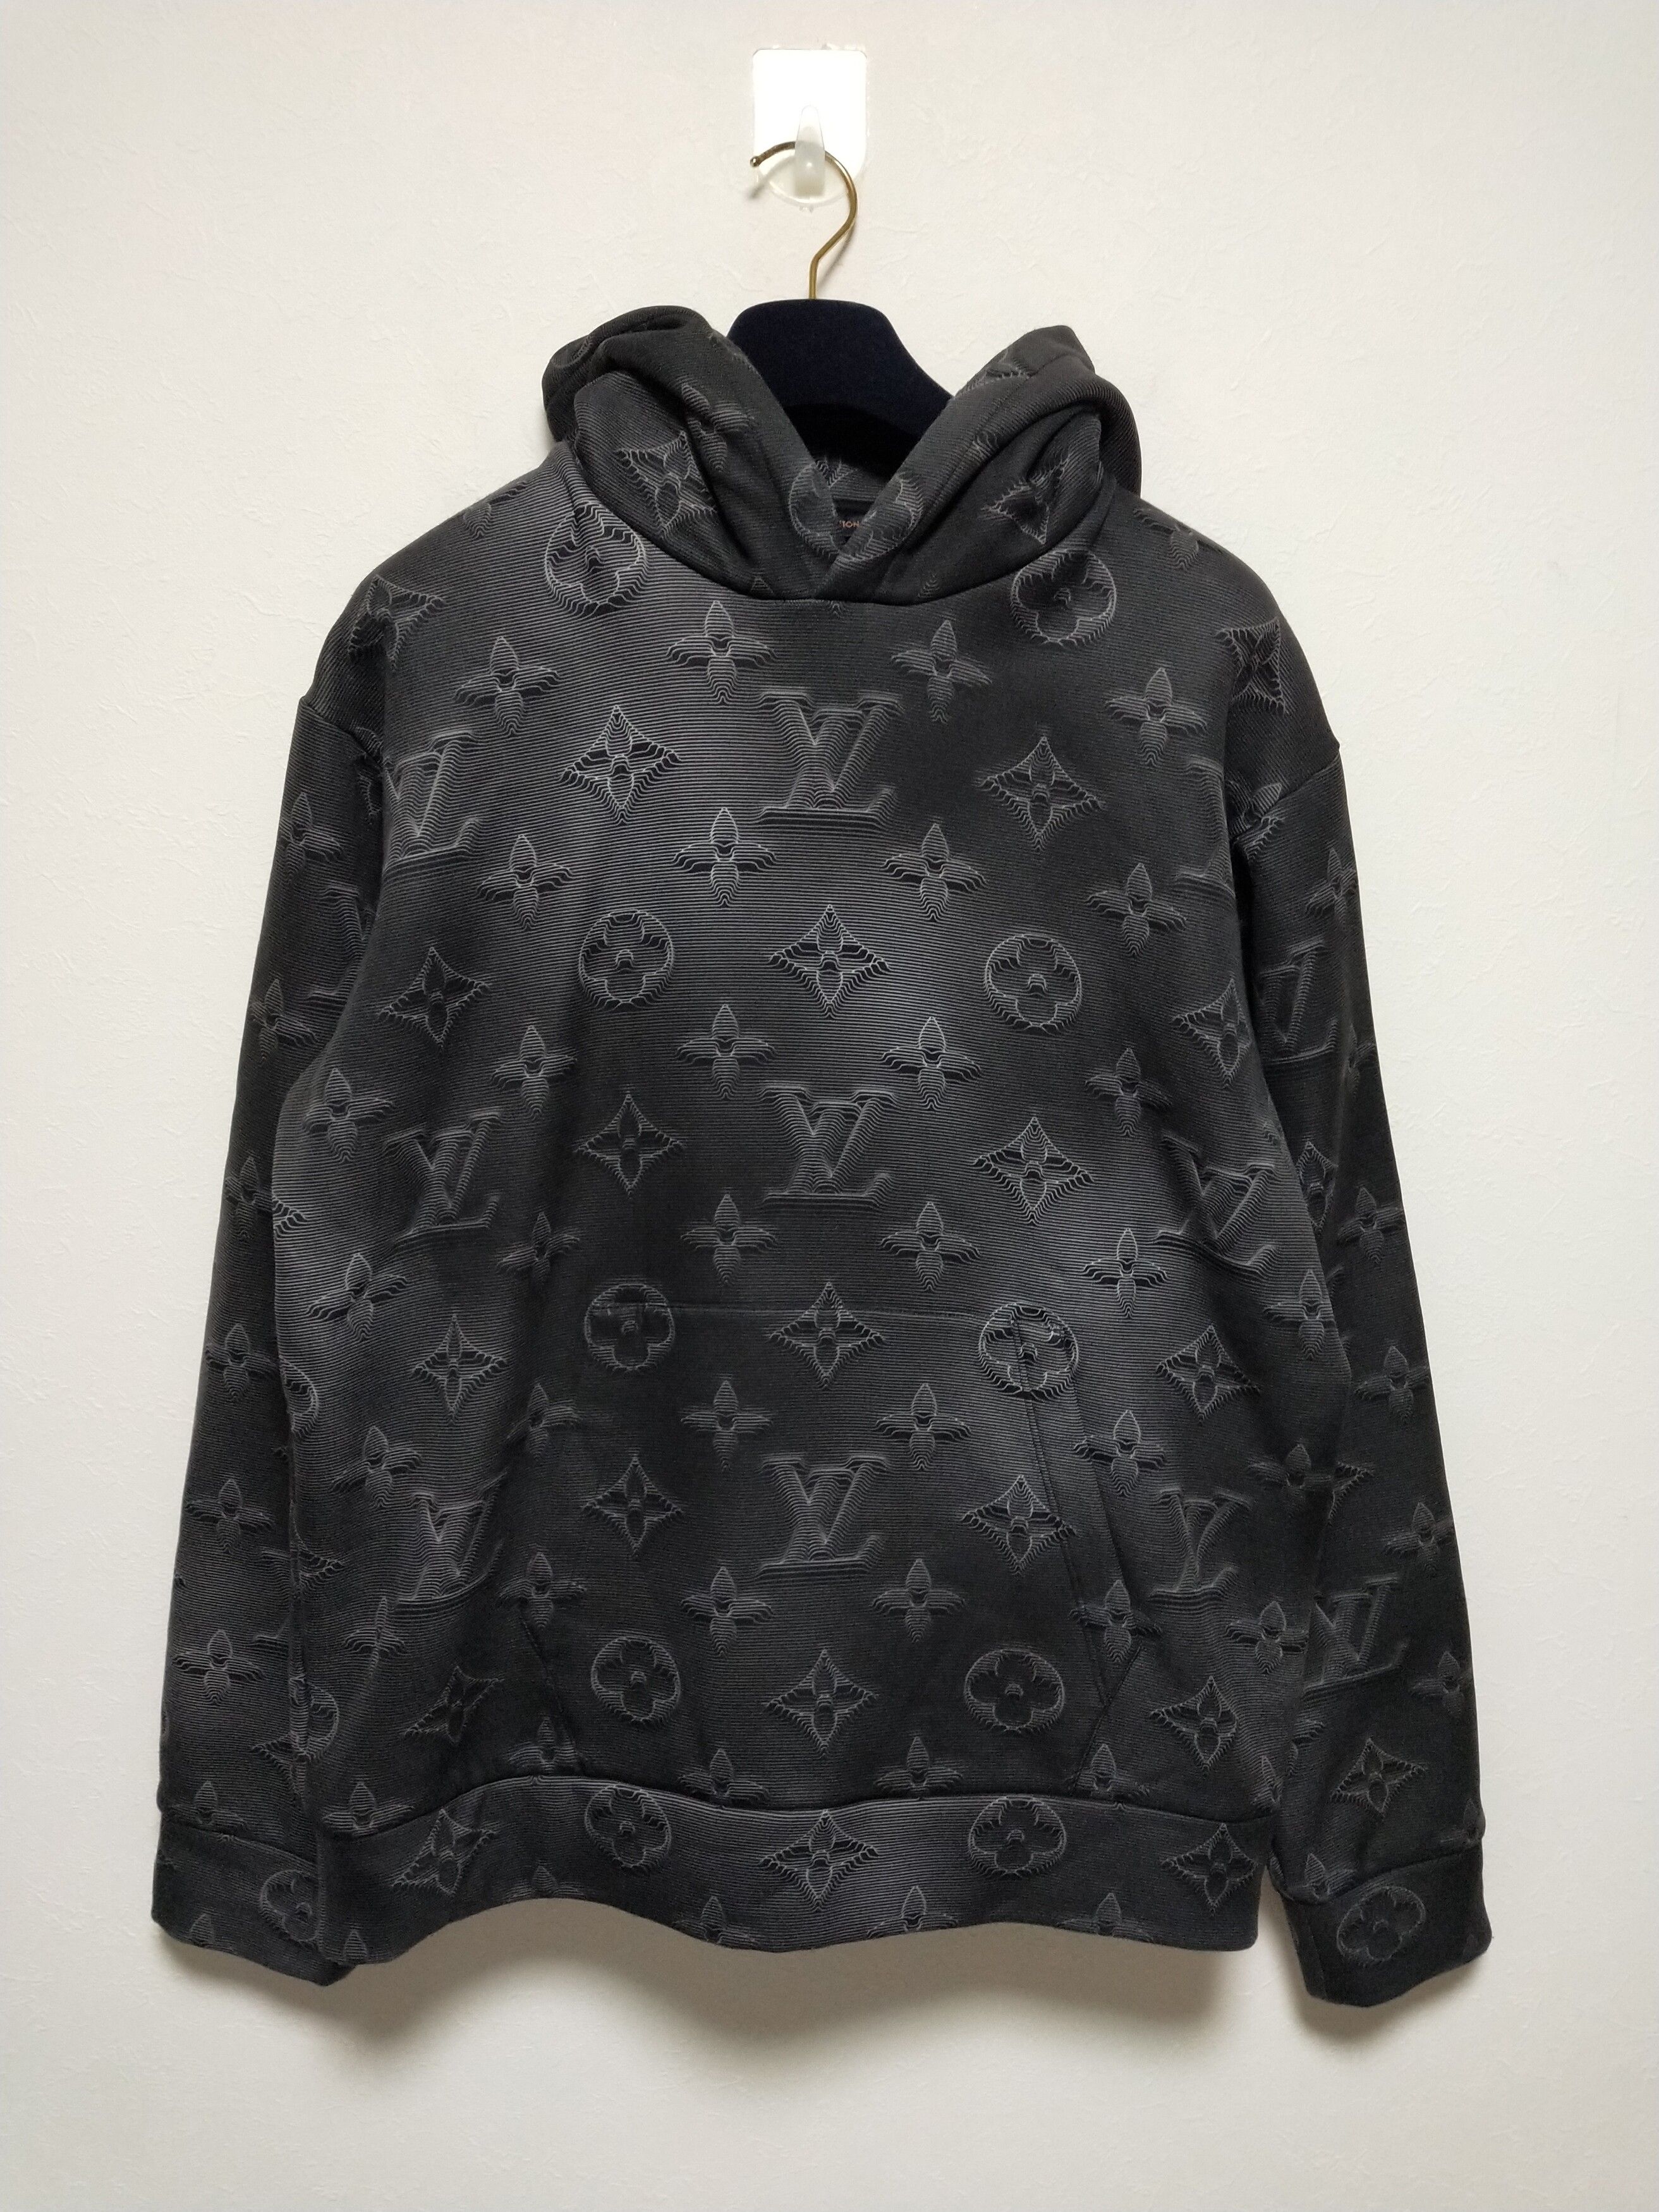 Louis Vuitton 2054 Hoodie in LE2 Leicester for £1,450.00 for sale